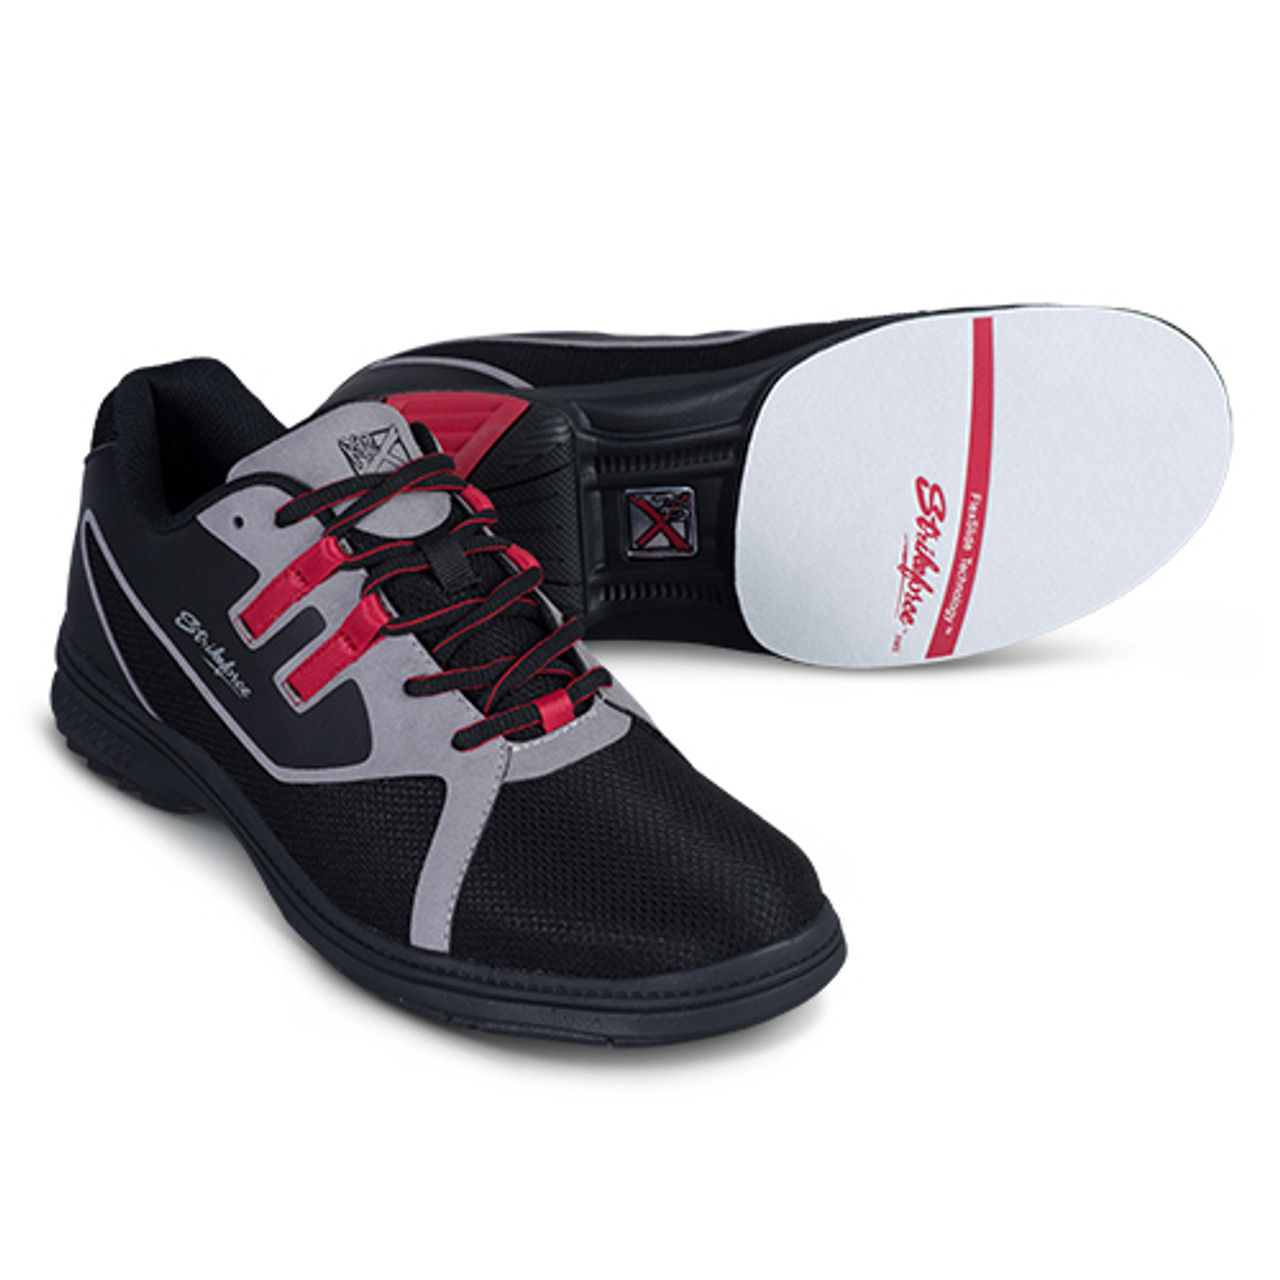 KR Strikeforce Mens Ignite Bowling Shoes Black/Grey/Red Right Handed WIDE